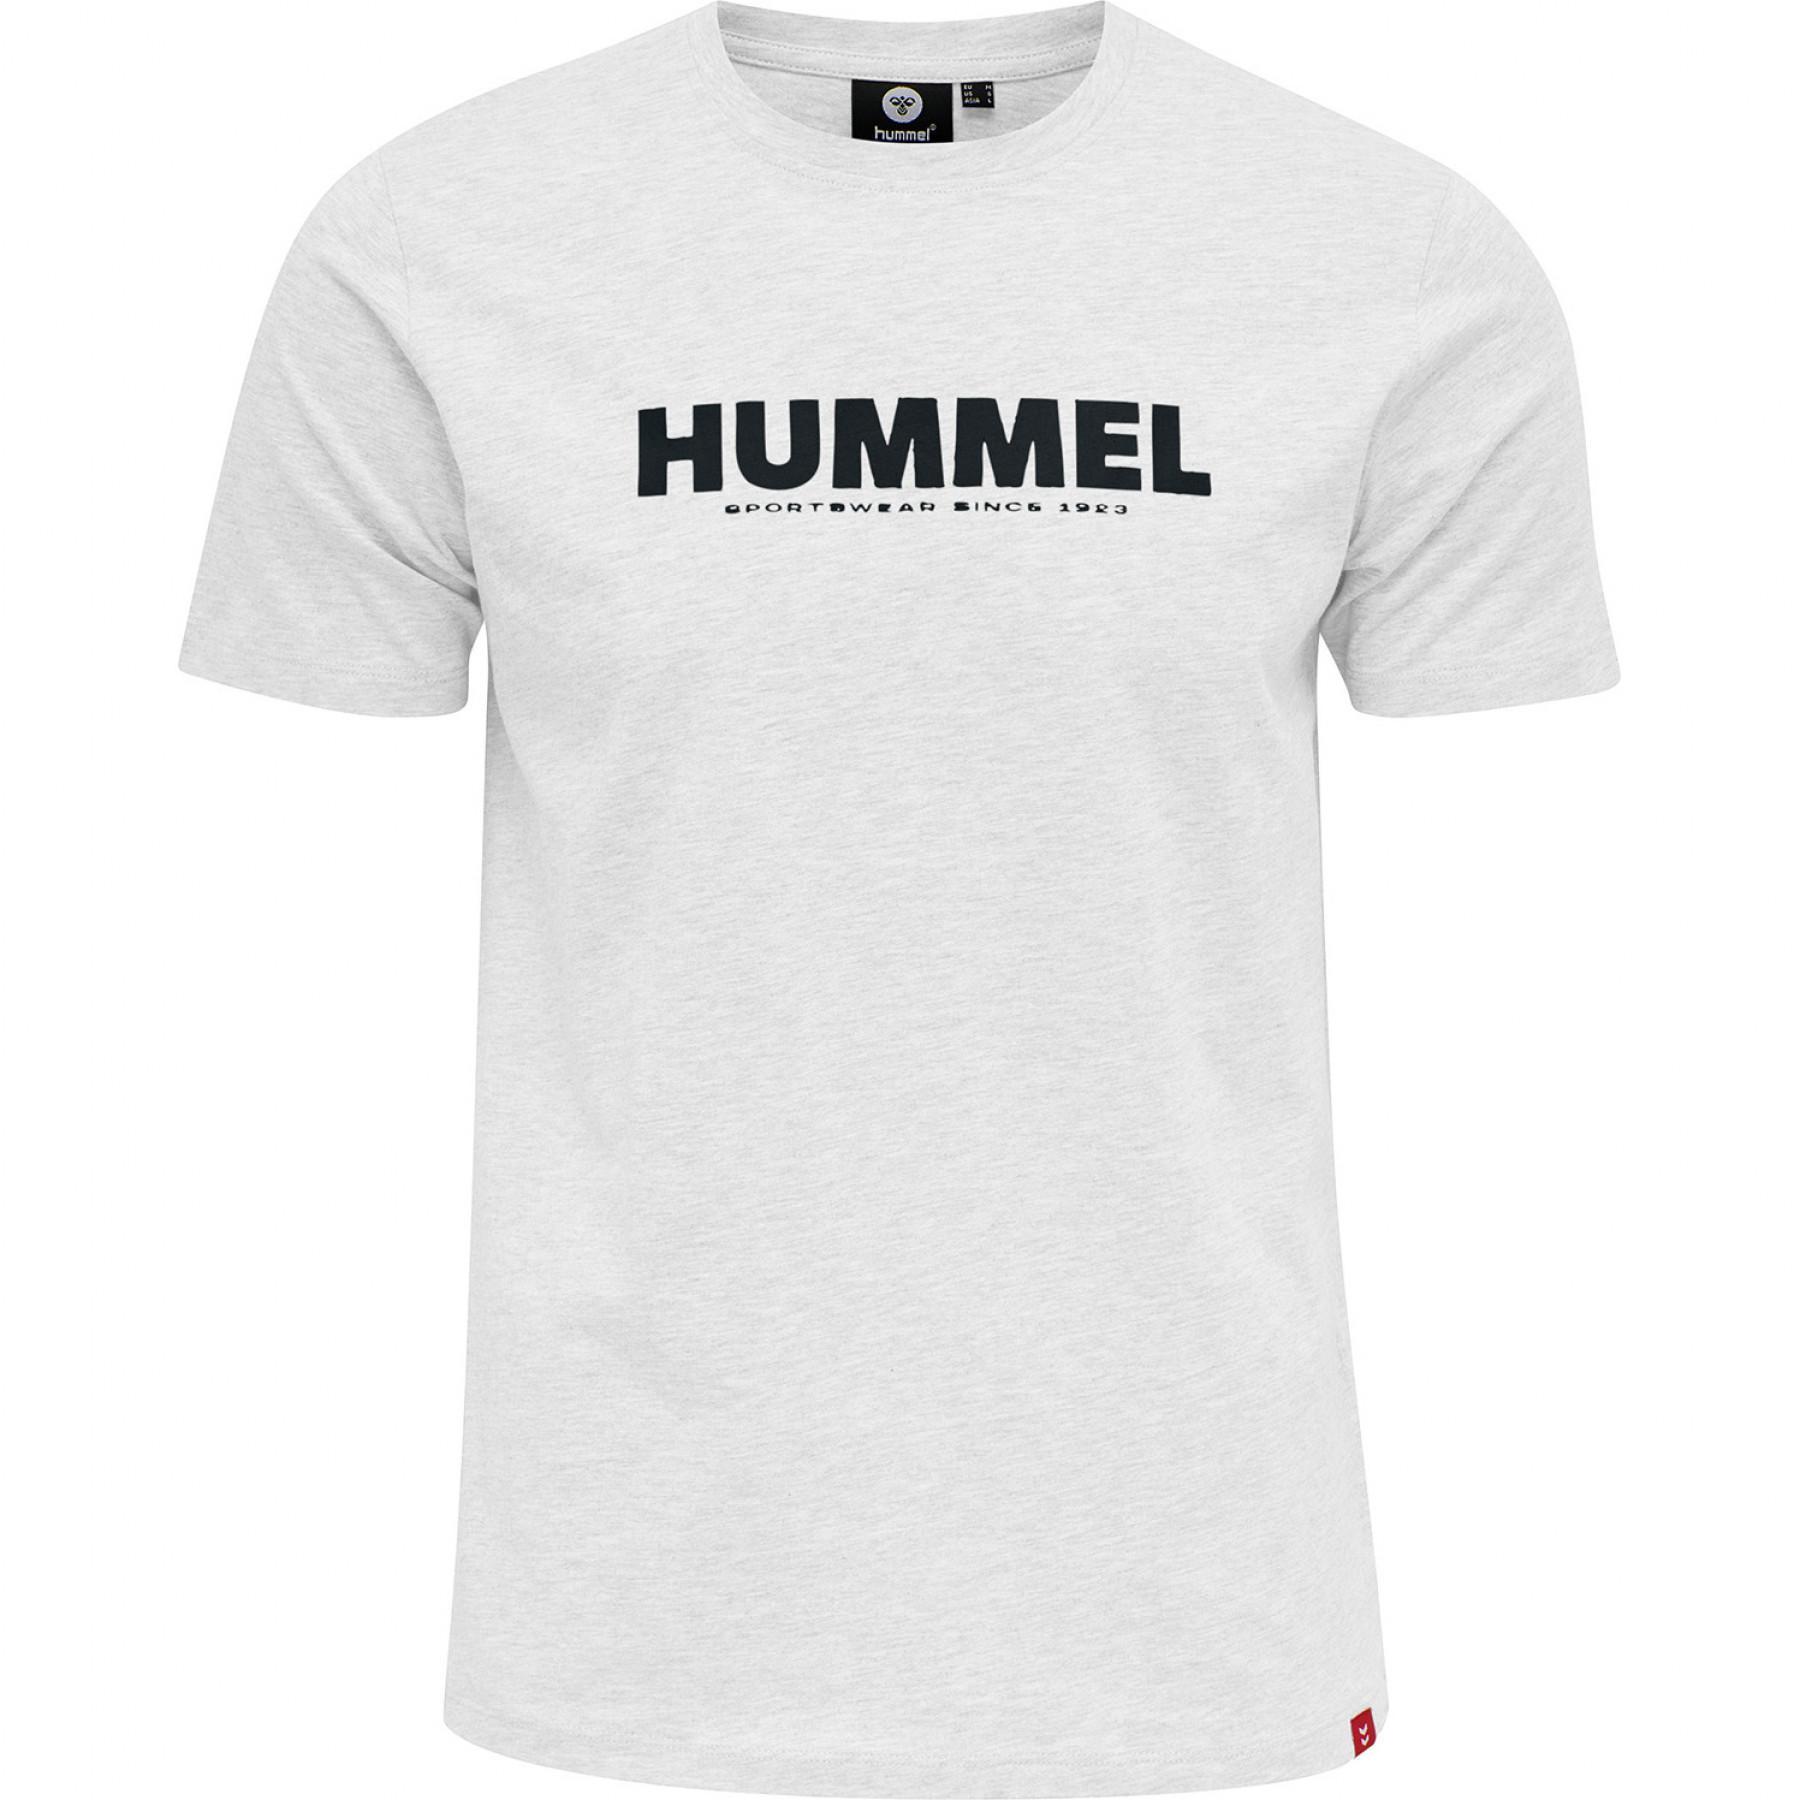 and - Hummel - T-shirt T-shirts hmllegacy Textile polos tennis - Table